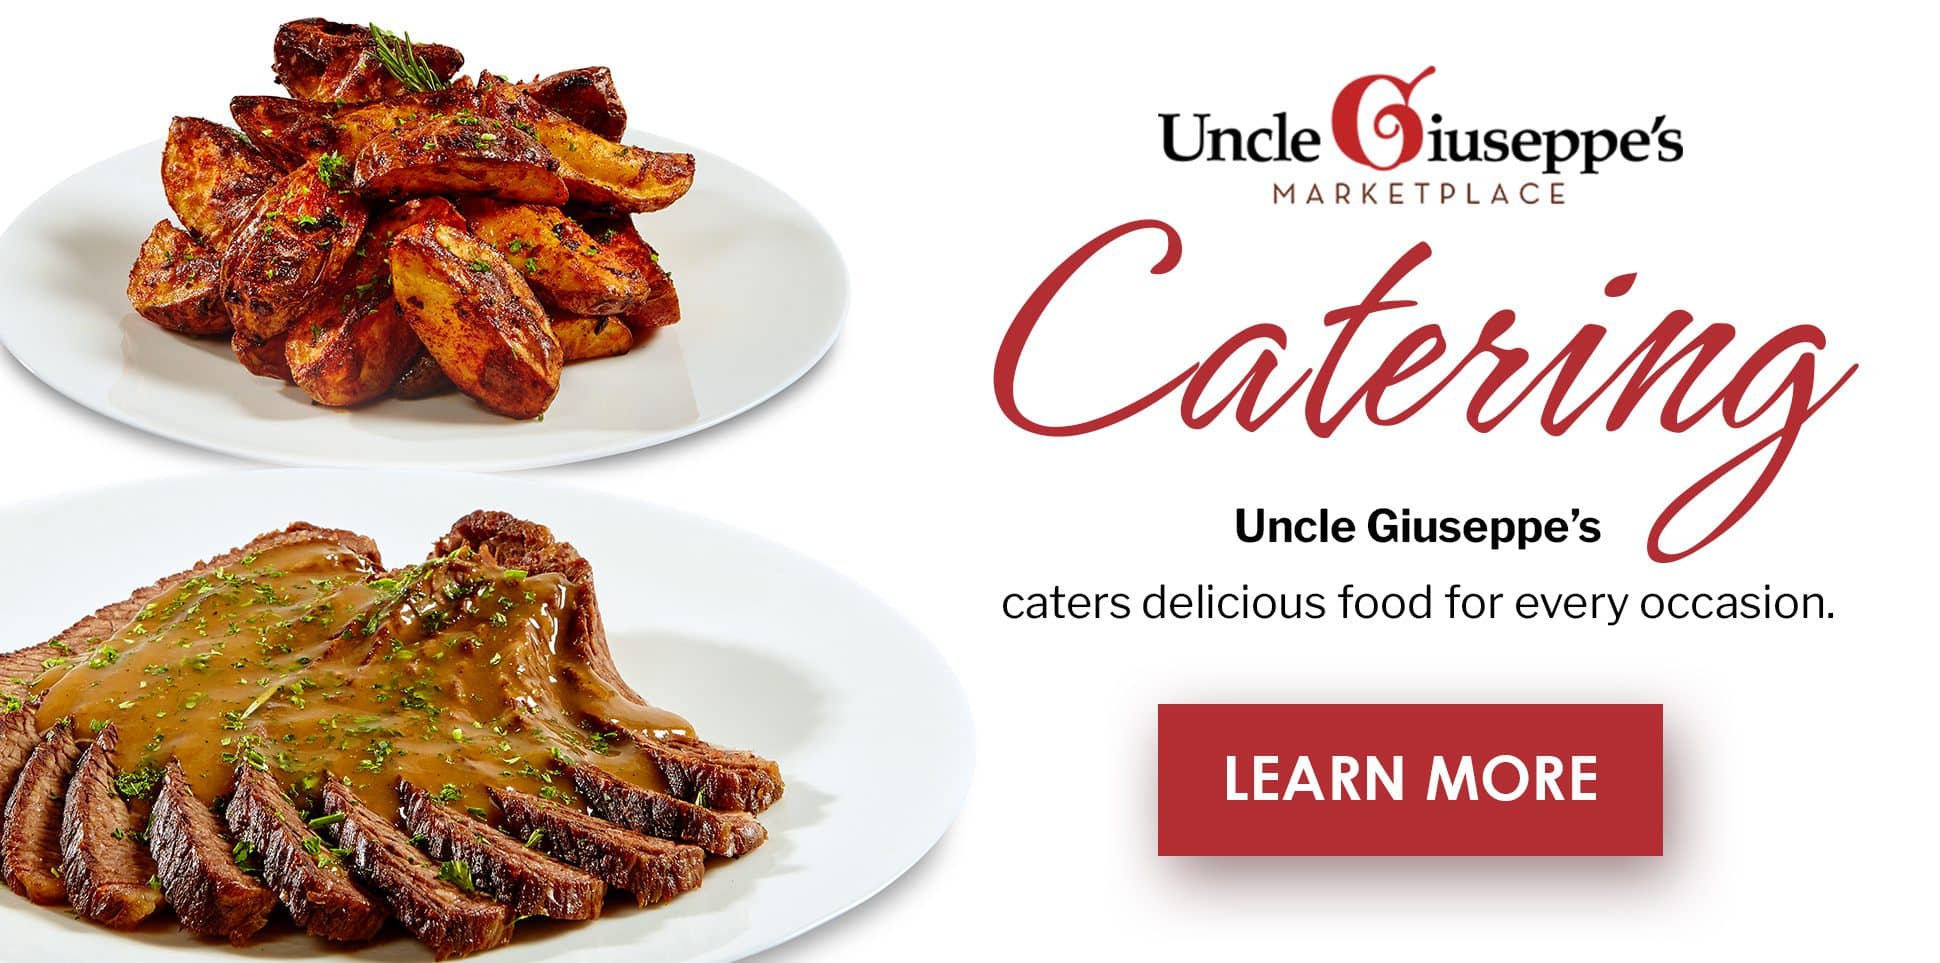 Uncle Giuseppe's Catering